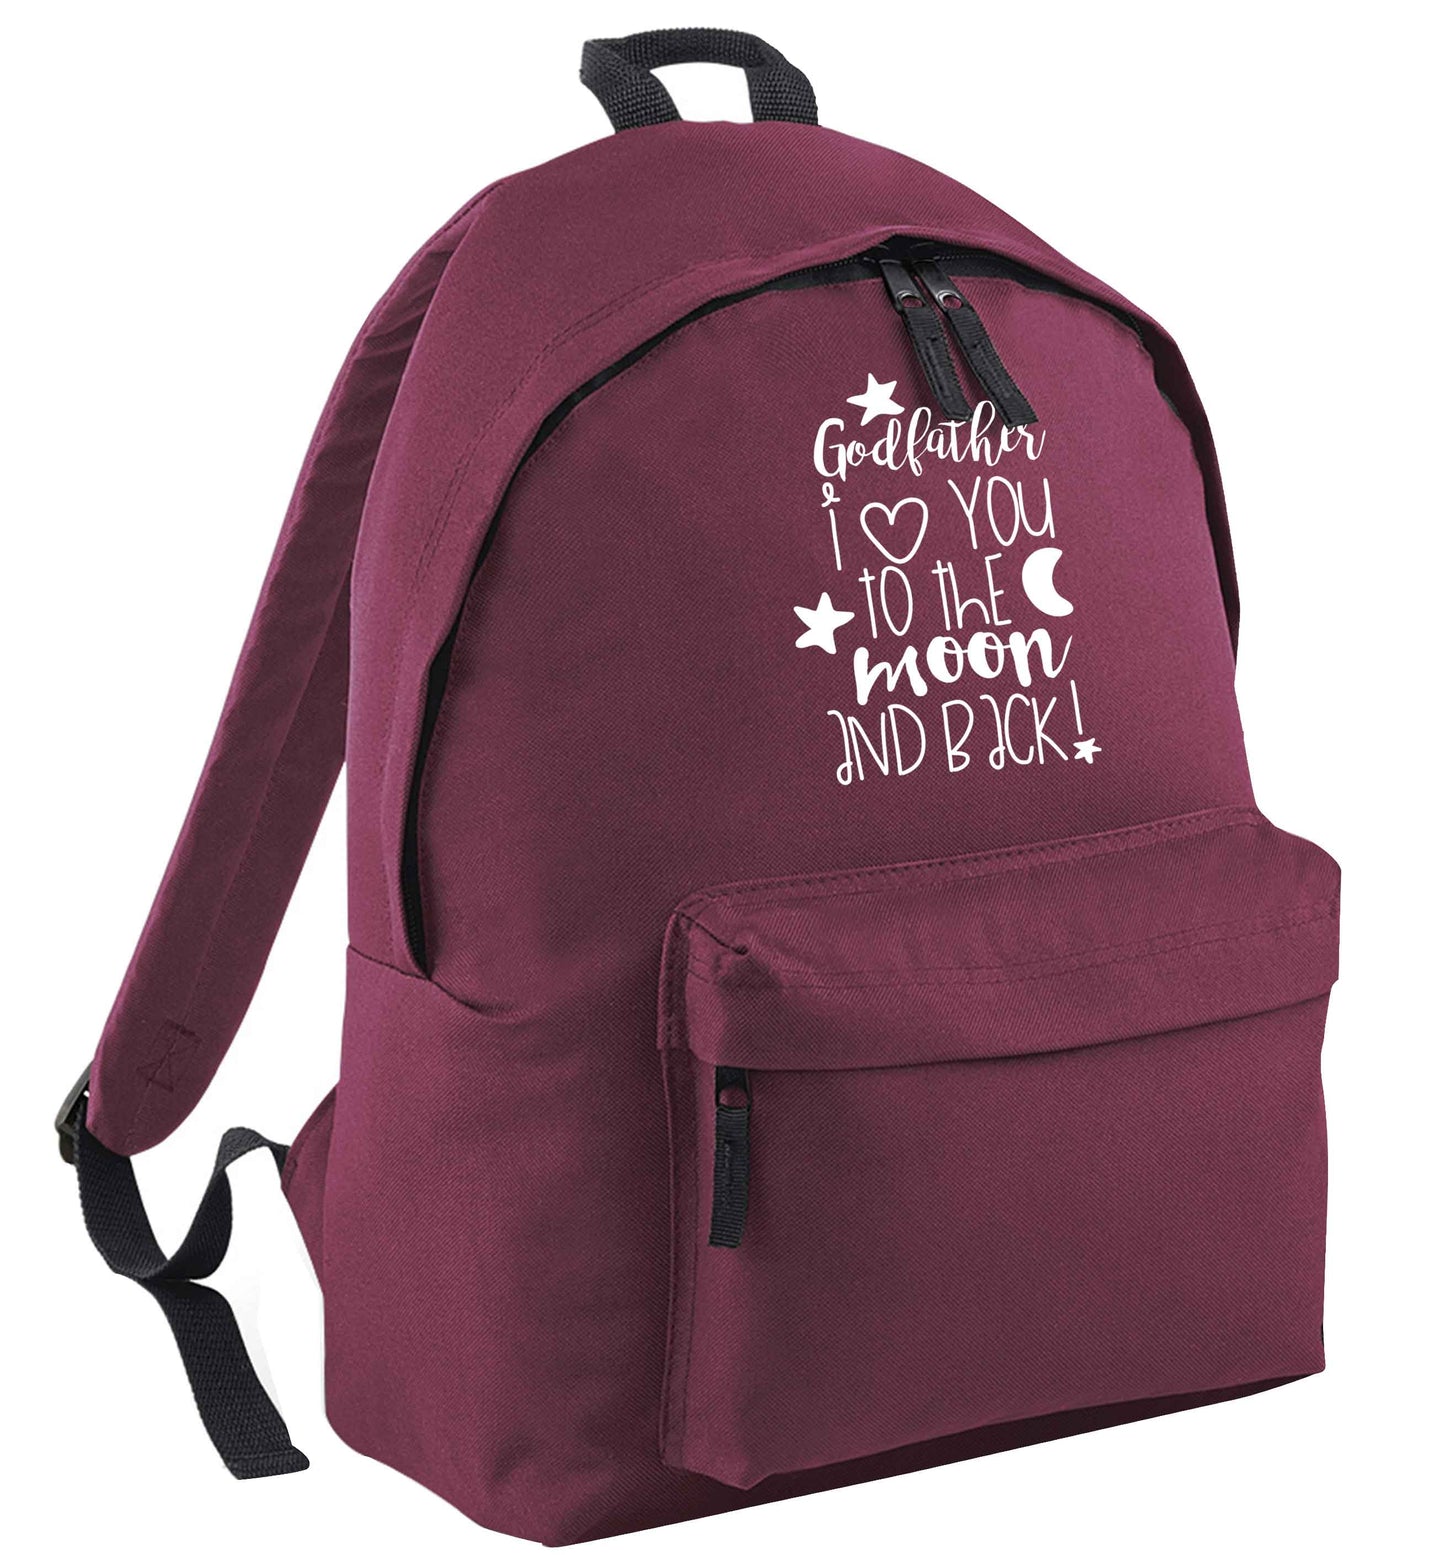 Godfather I love you to the moon and back maroon adults backpack